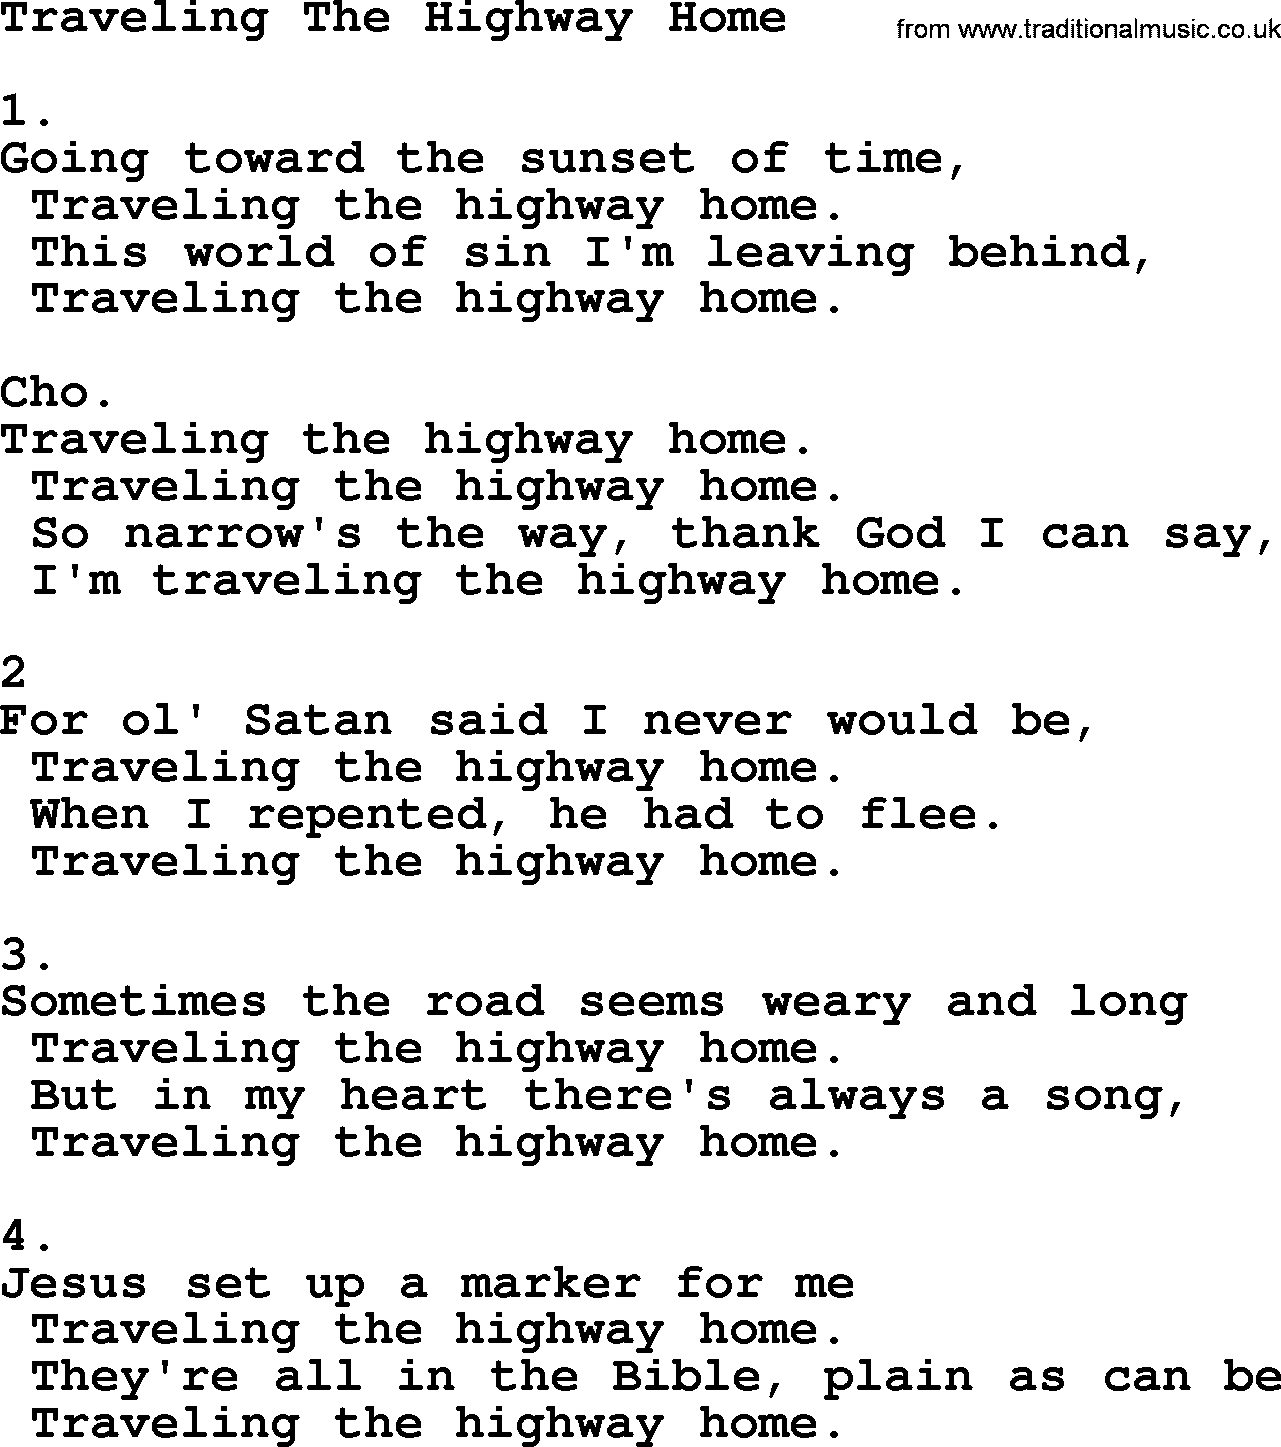 Apostolic & Pentecostal Hymns and Songs, Hymn: Traveling The Highway Home lyrics and PDF